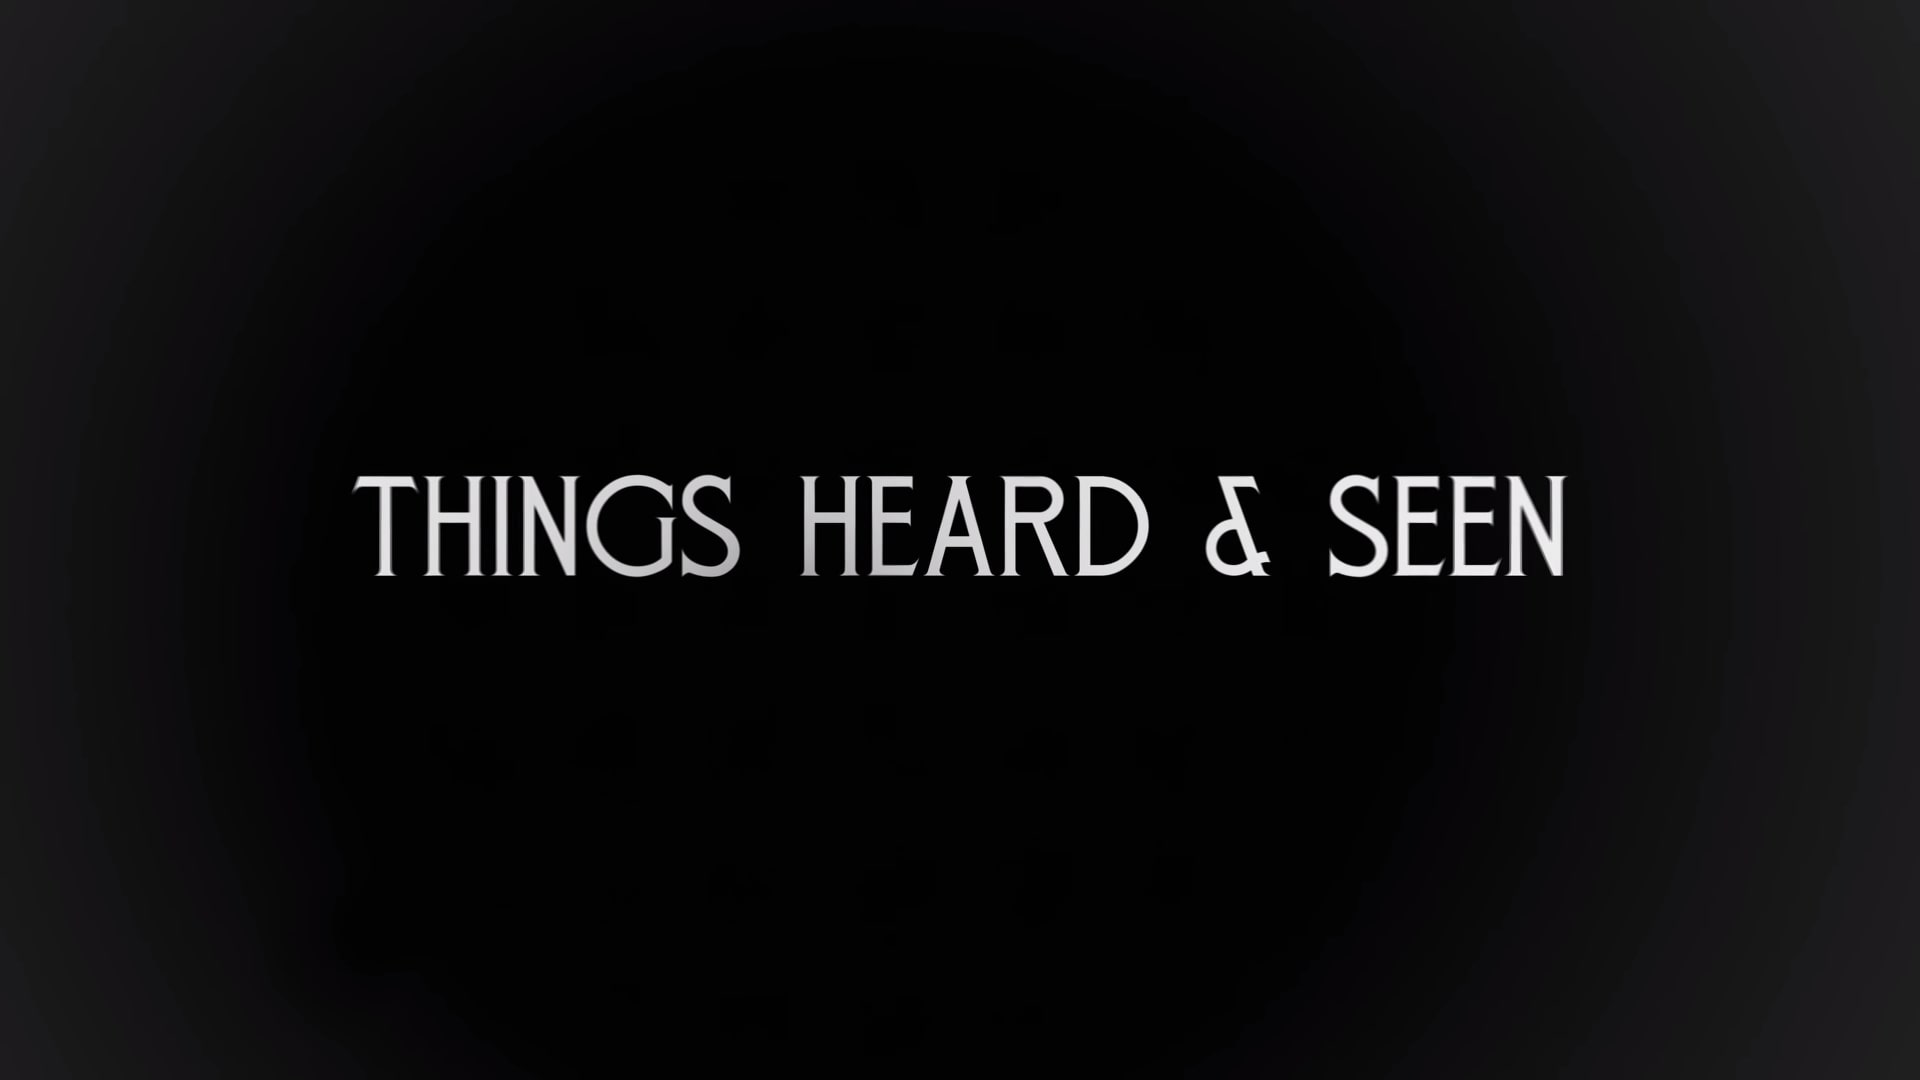 Netflix Things Heard and Seen Trailer, Netflix Horror Movies, Coming to Netflix in April 2021